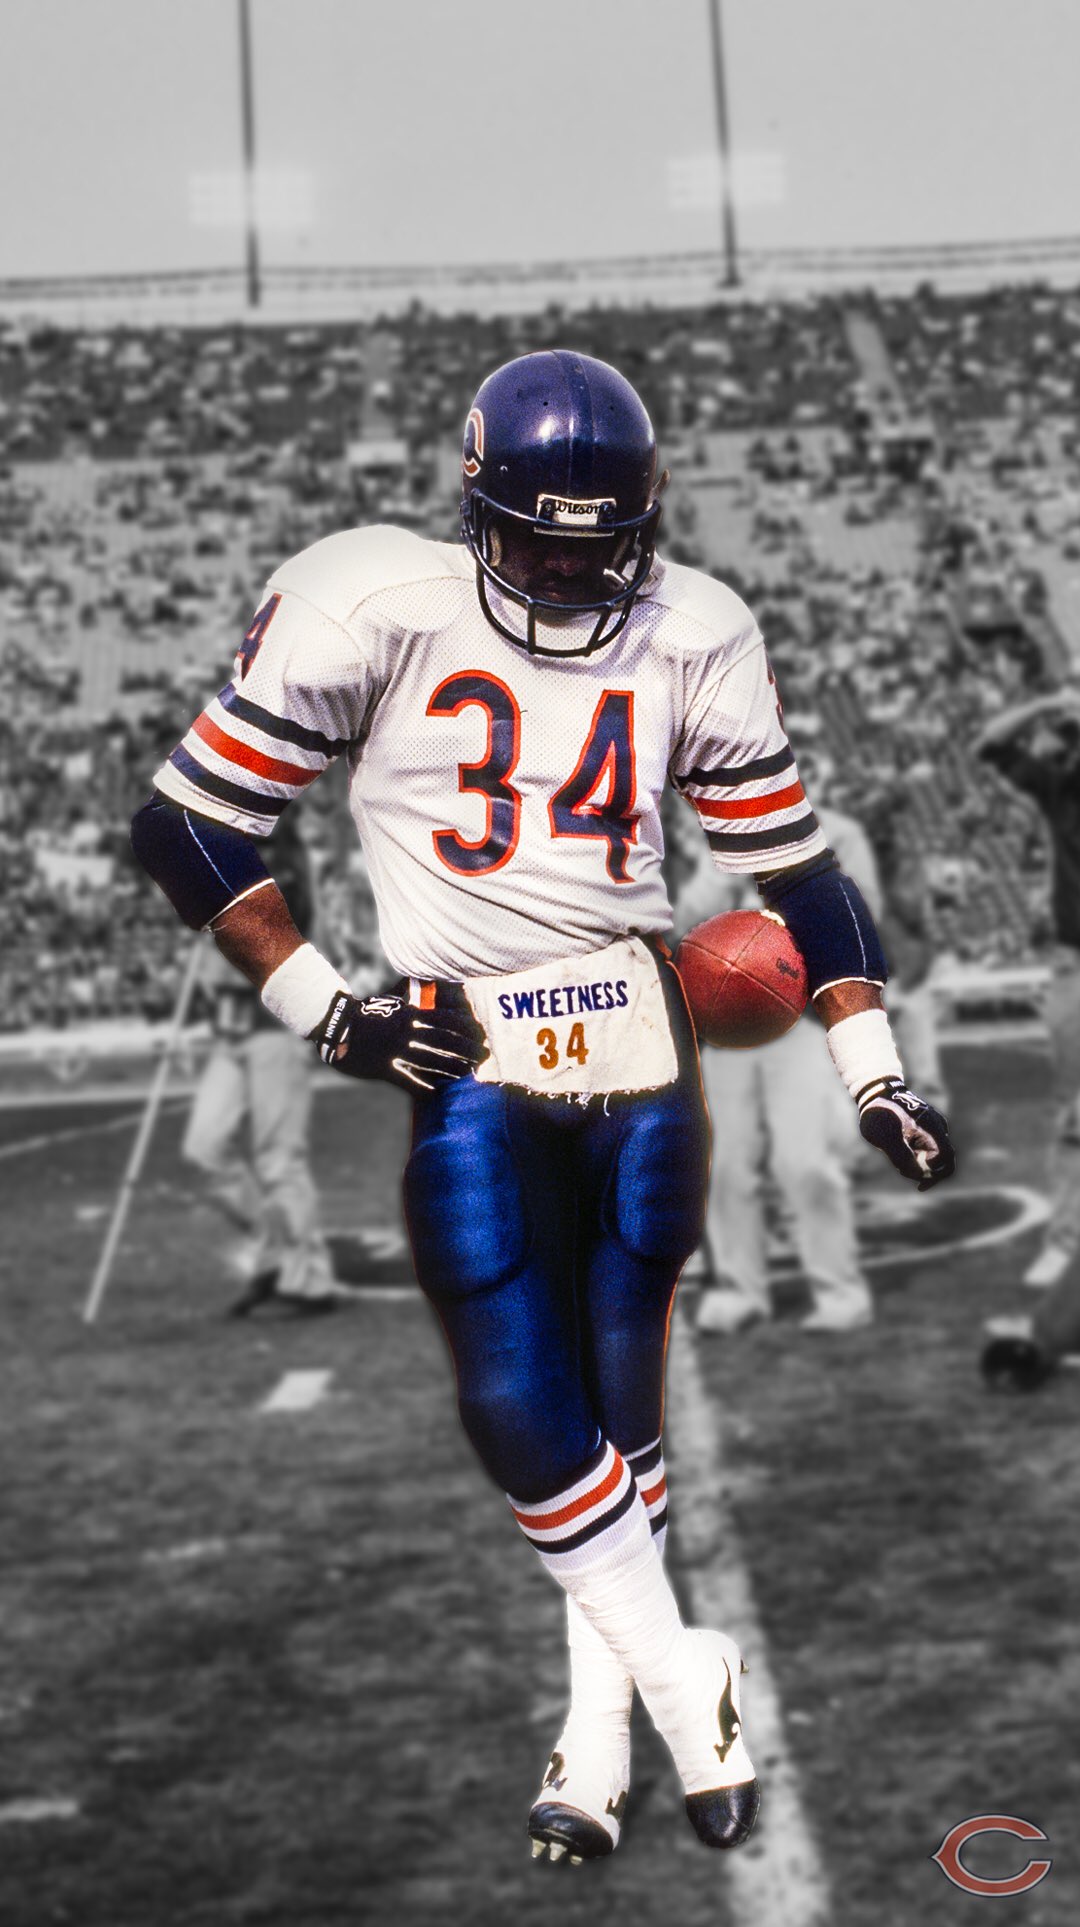 Chicago bears on walter payton wallpaperwednesday sweetness honor da ð by updating your lock screen with one of these special edition wallpapers ðâï httpstcoktqrtyohq